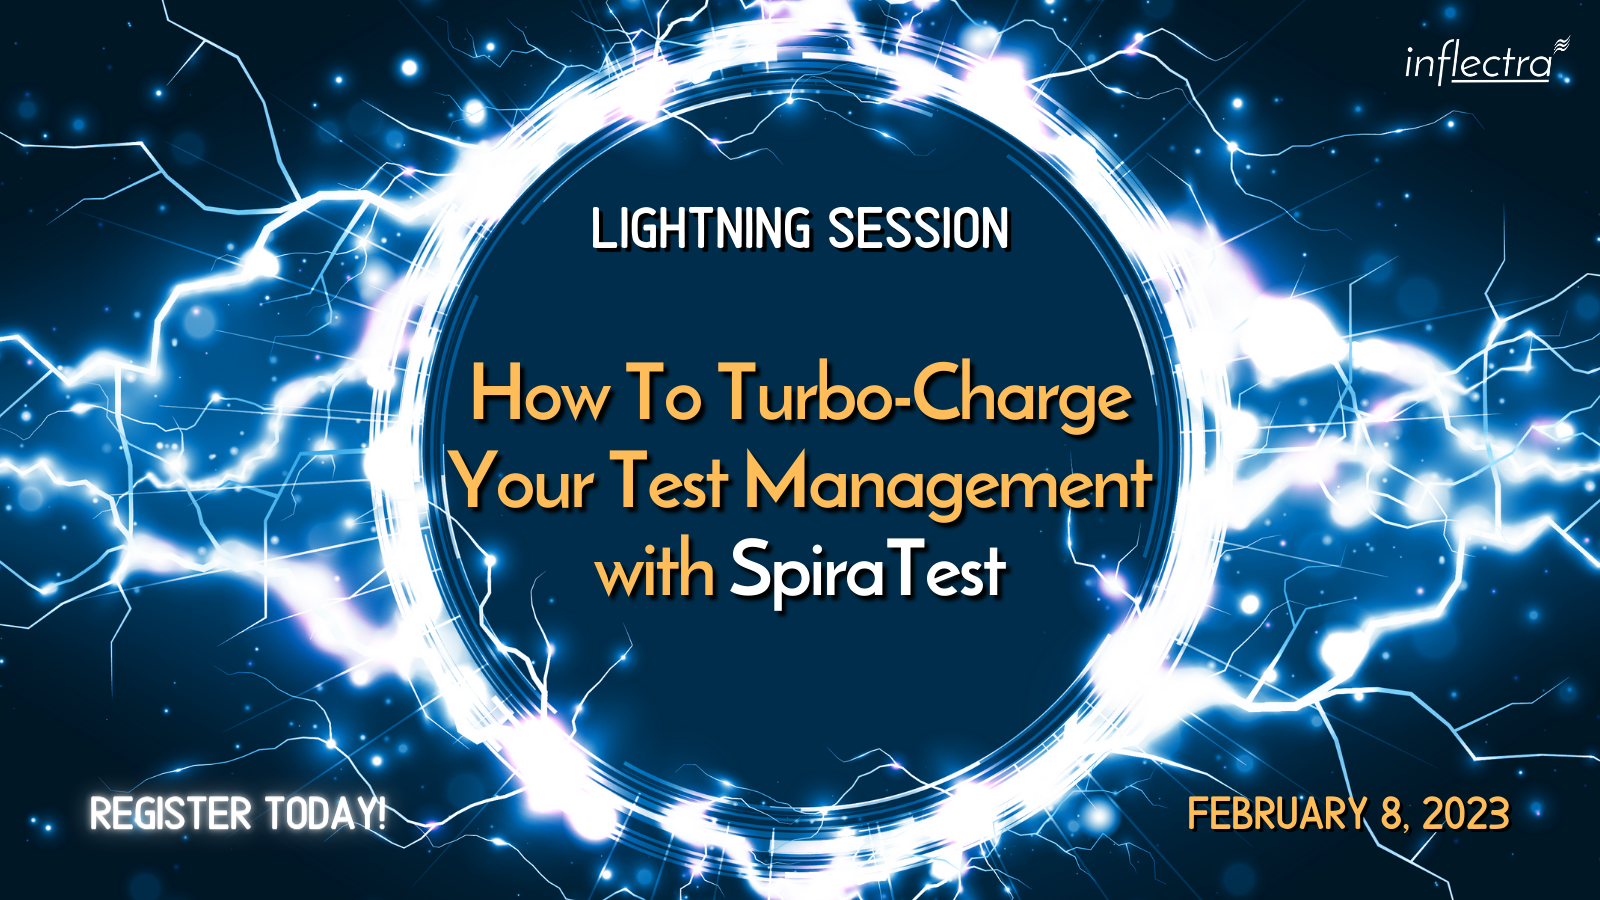 how-to-turbo-charge-your-test-management-with-spiratest-image